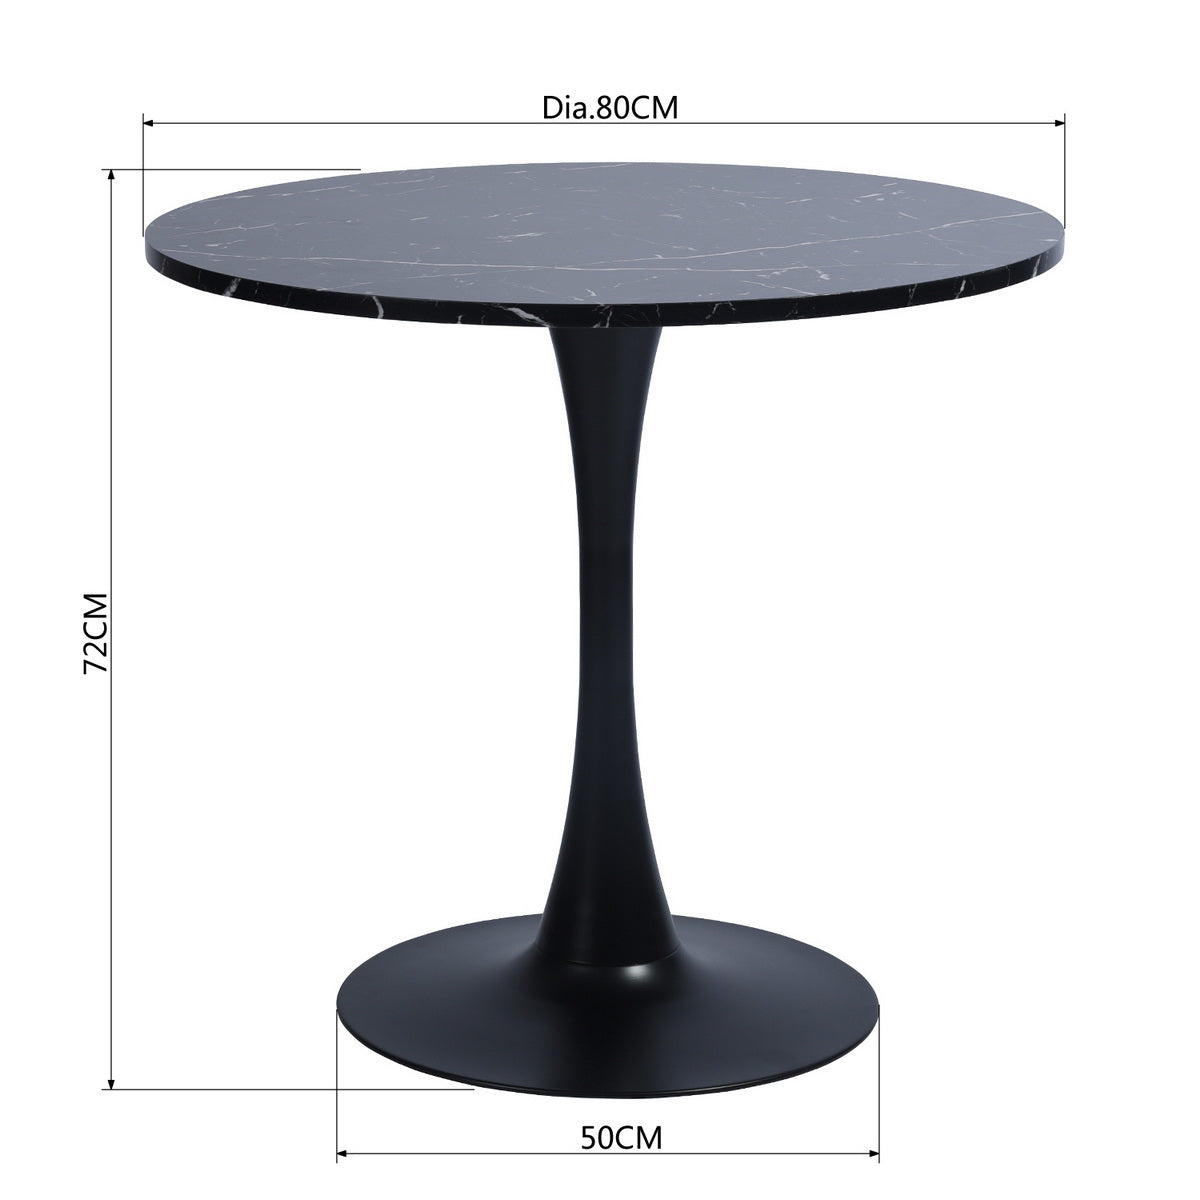 Clift Marble Effect Top Dining Table